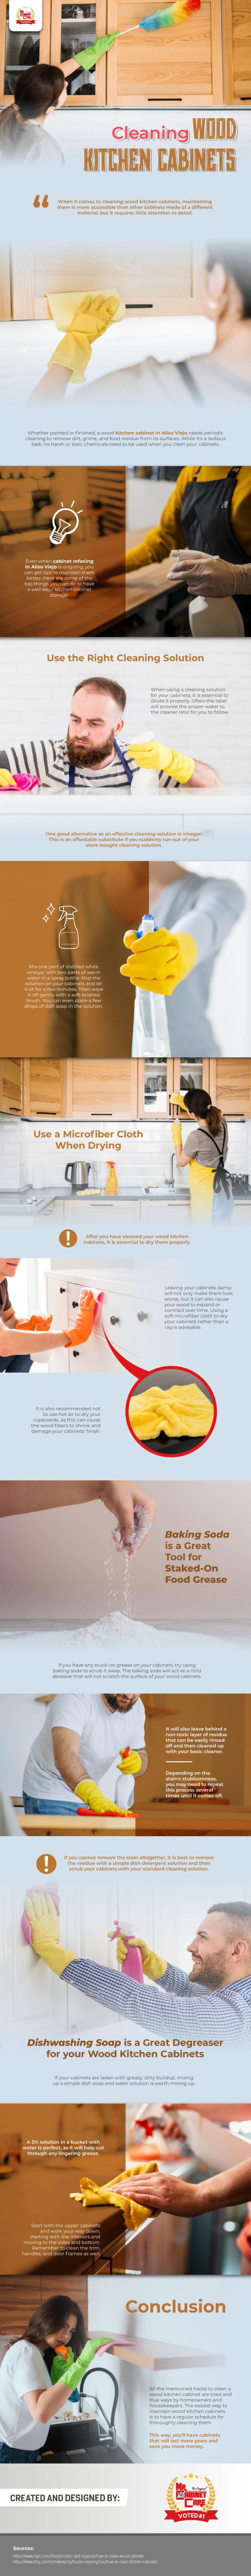 Cleaning Wood Kitchen Cabinets